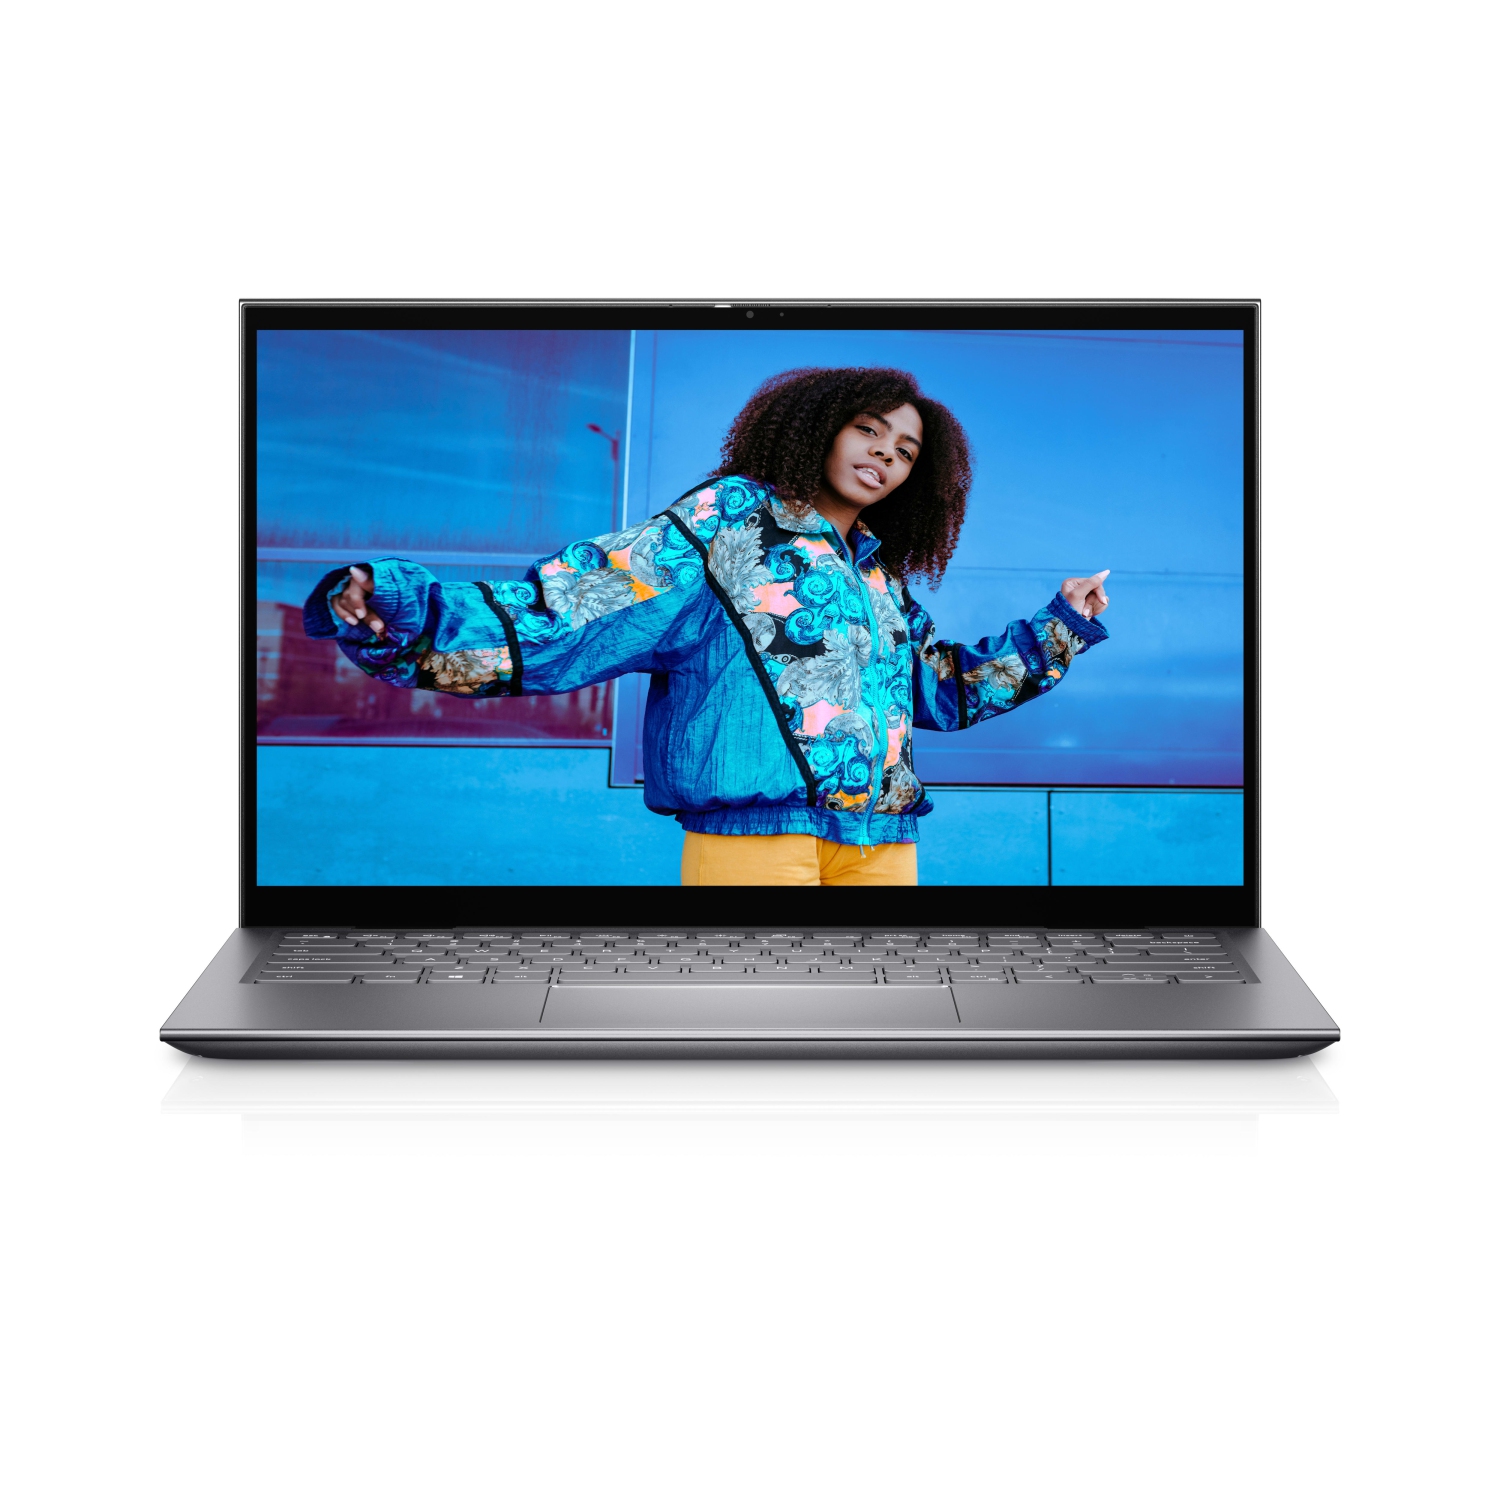 Refurbished (Excellent) – Dell Inspiron 5410 2-in-1 (2021) | 14" FHD Touch | Core i7 - 128GB SSD - 4GB RAM | 4 Cores @ 4.7 GHz - 11th Gen CPU